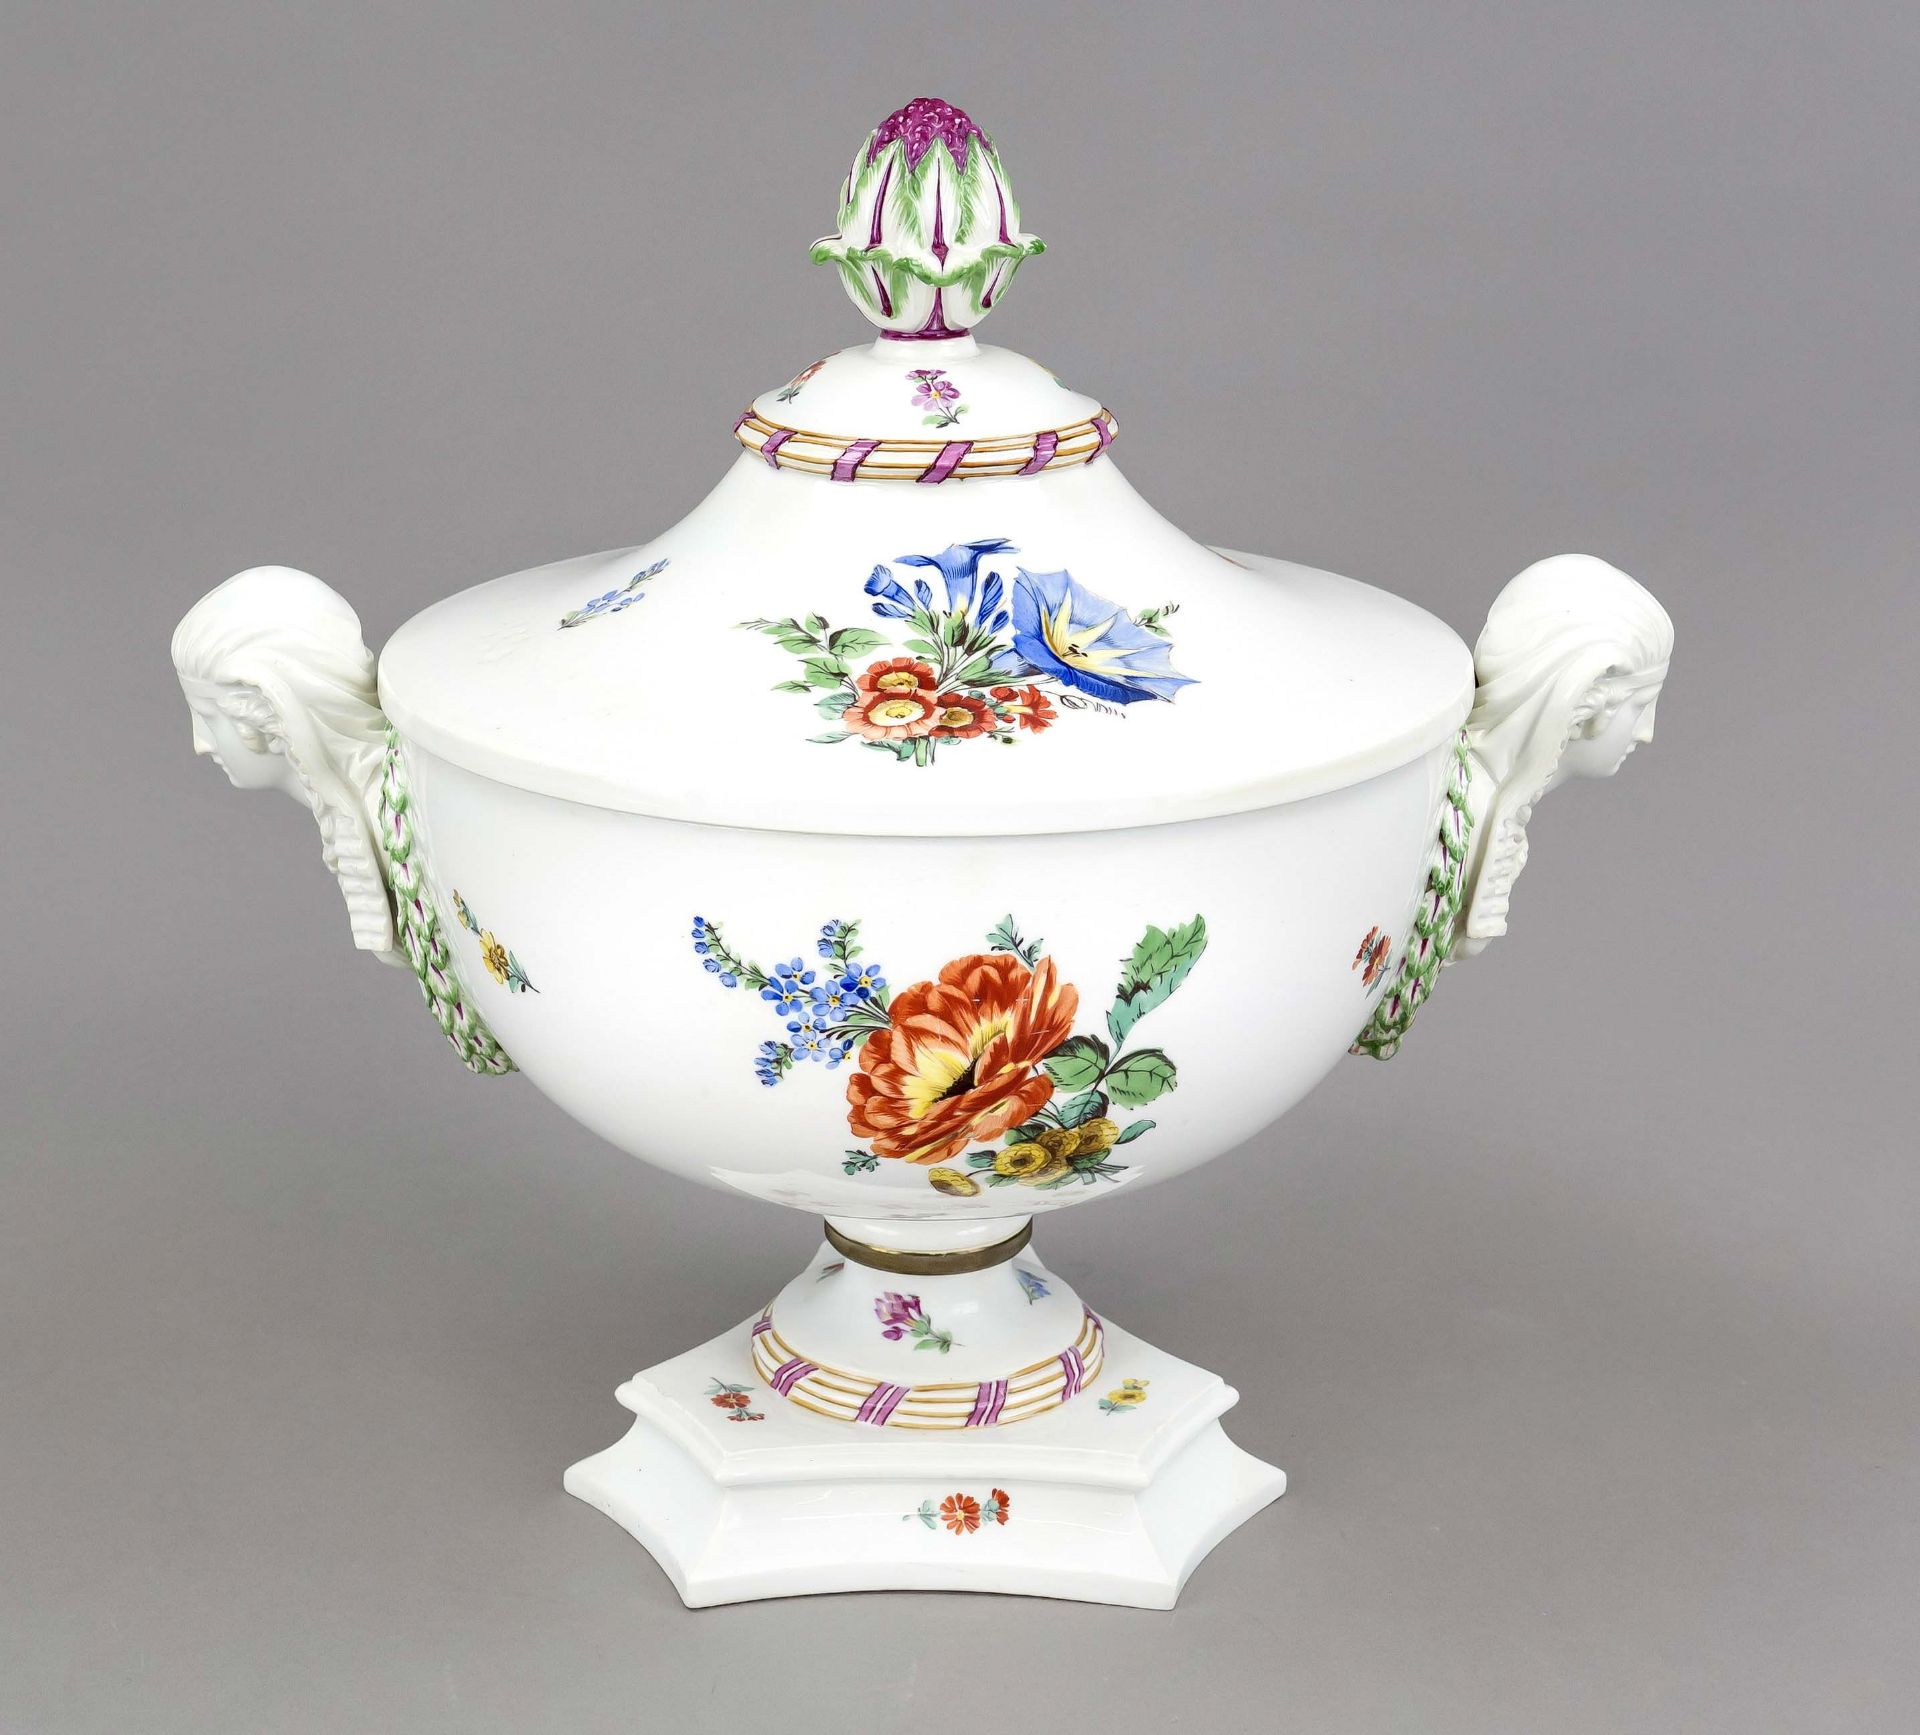 A rare Classicist lidded tureen with pharaoh's heads, Meissen, Marcolini mark 1774-1814, designed by - Image 2 of 3